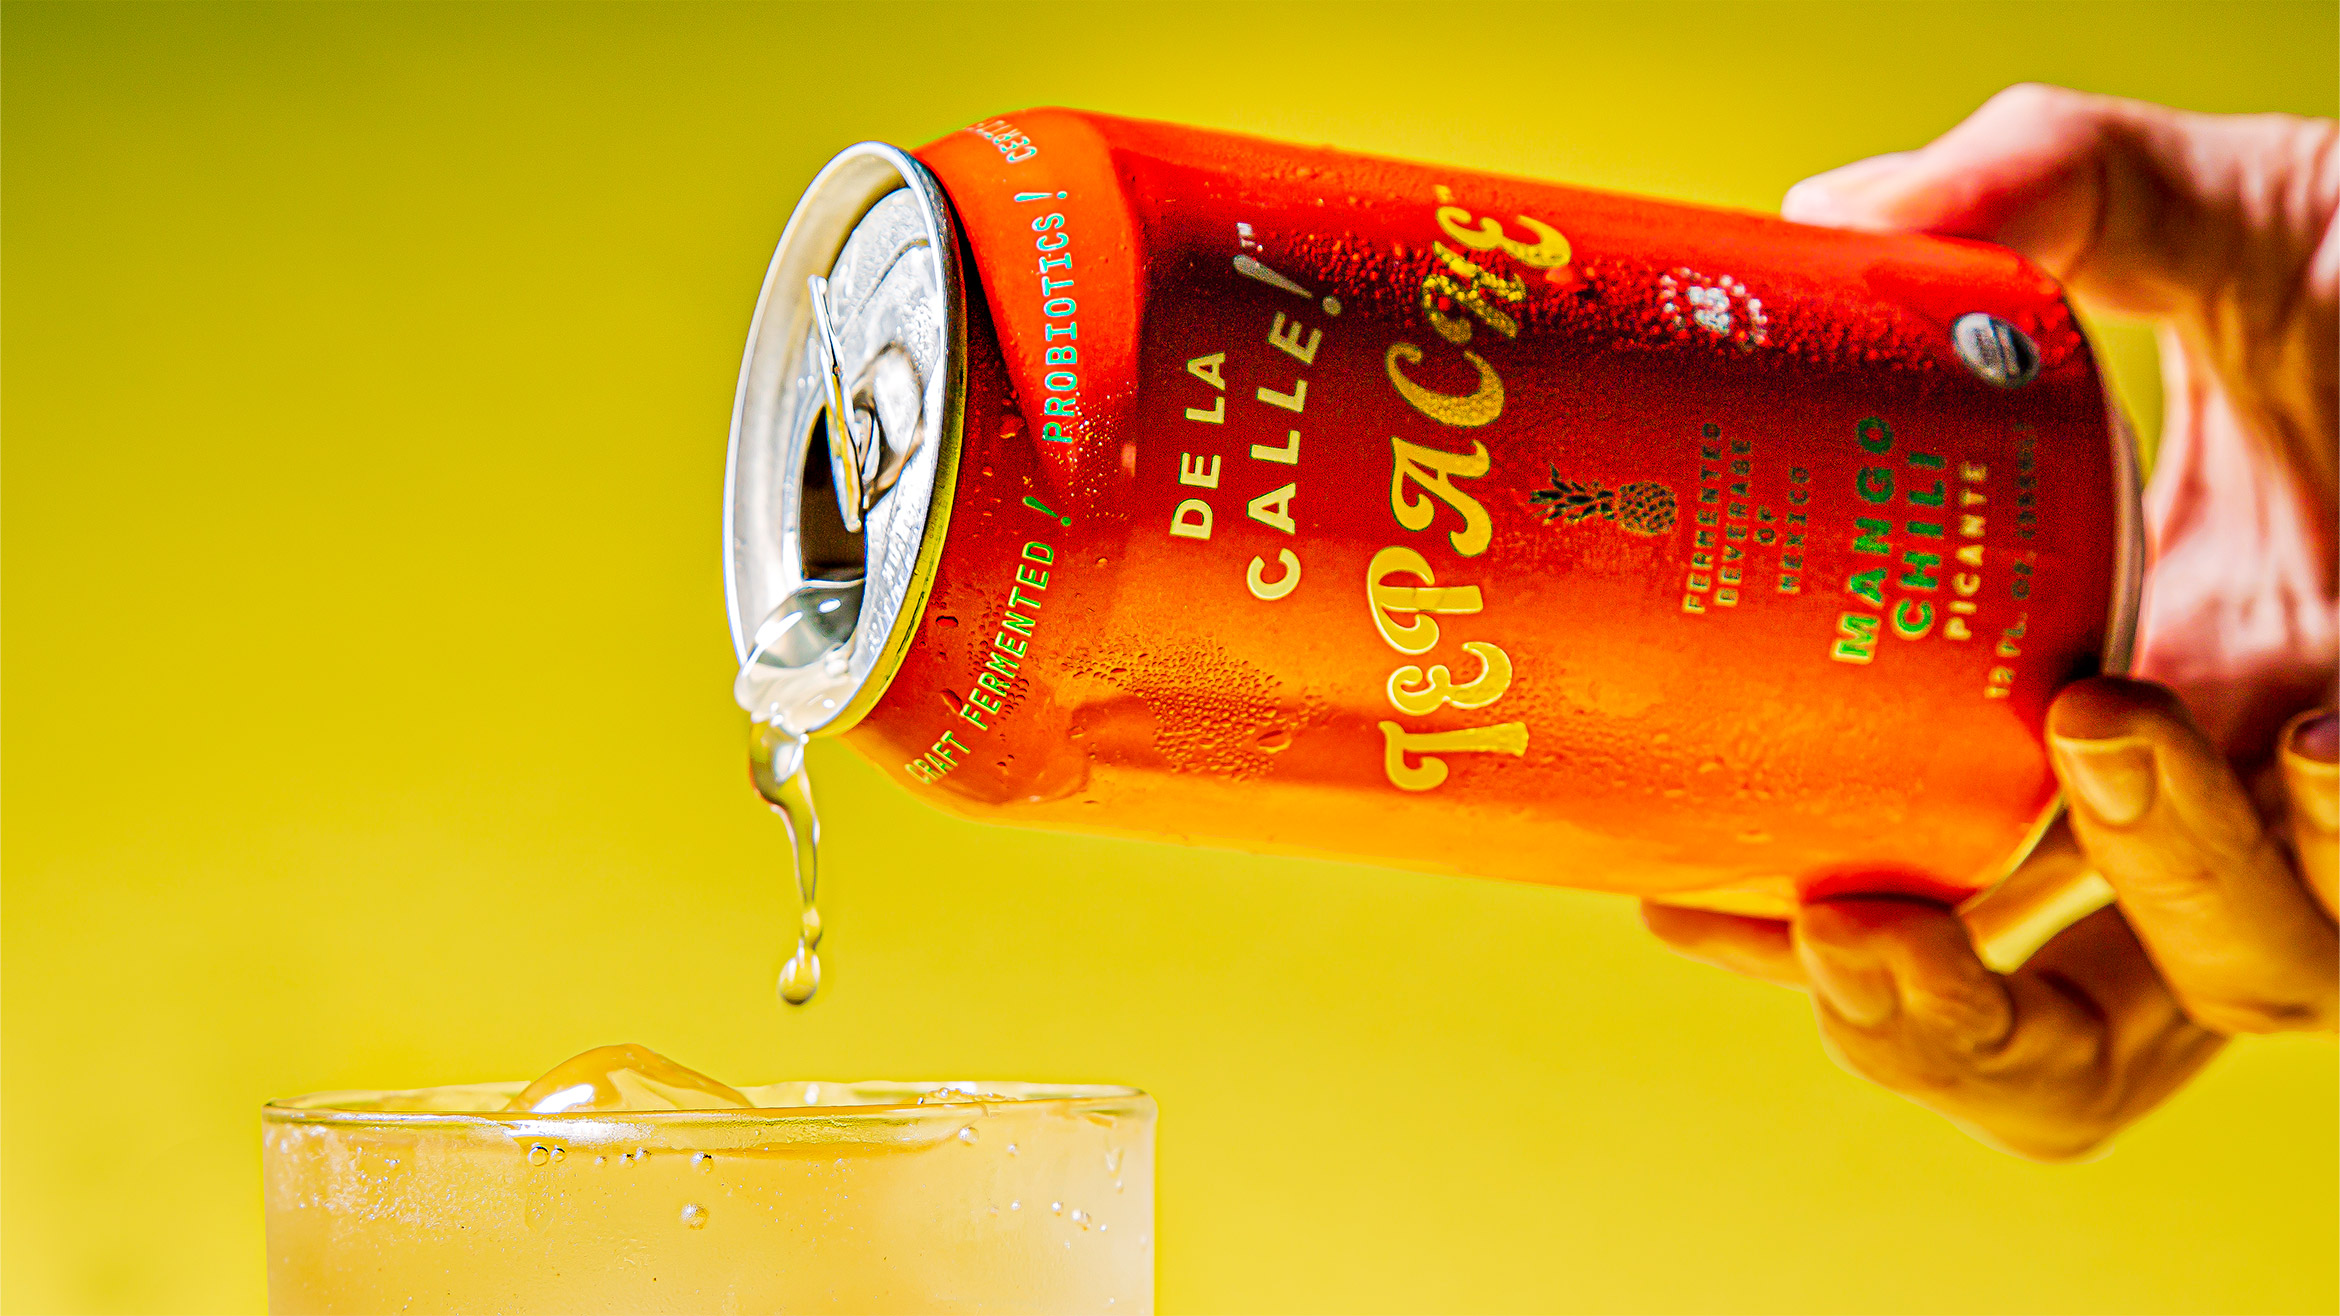 A can of Tepache is poured into a glass.